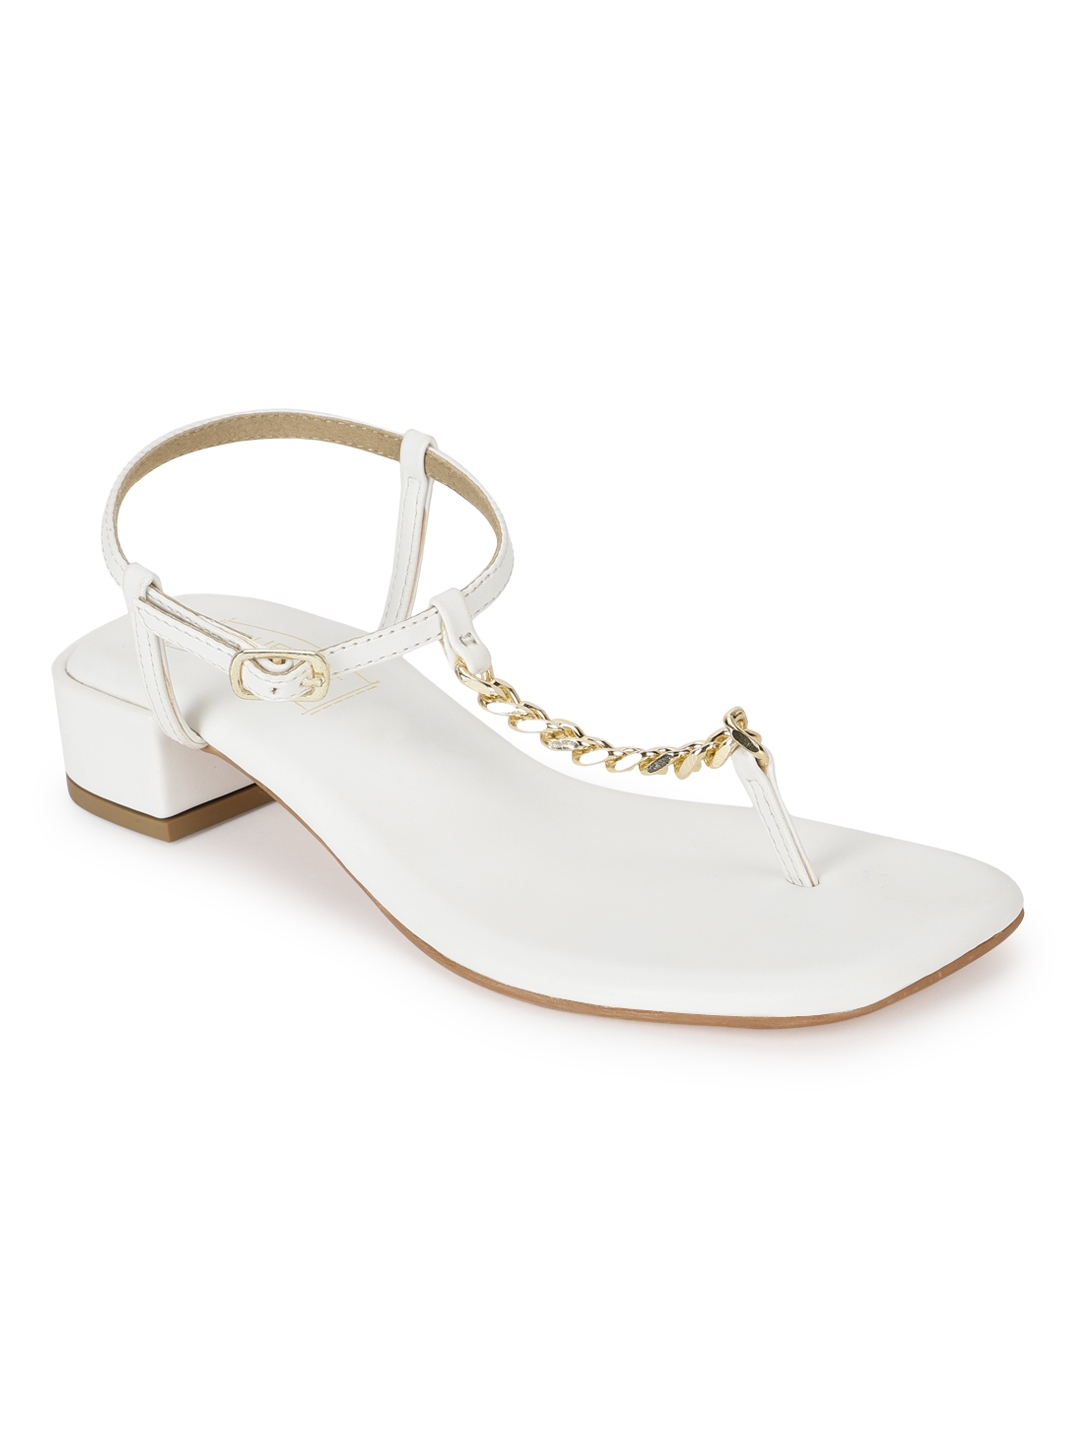 White PU Low Block Heel Sandals With Gold Chain